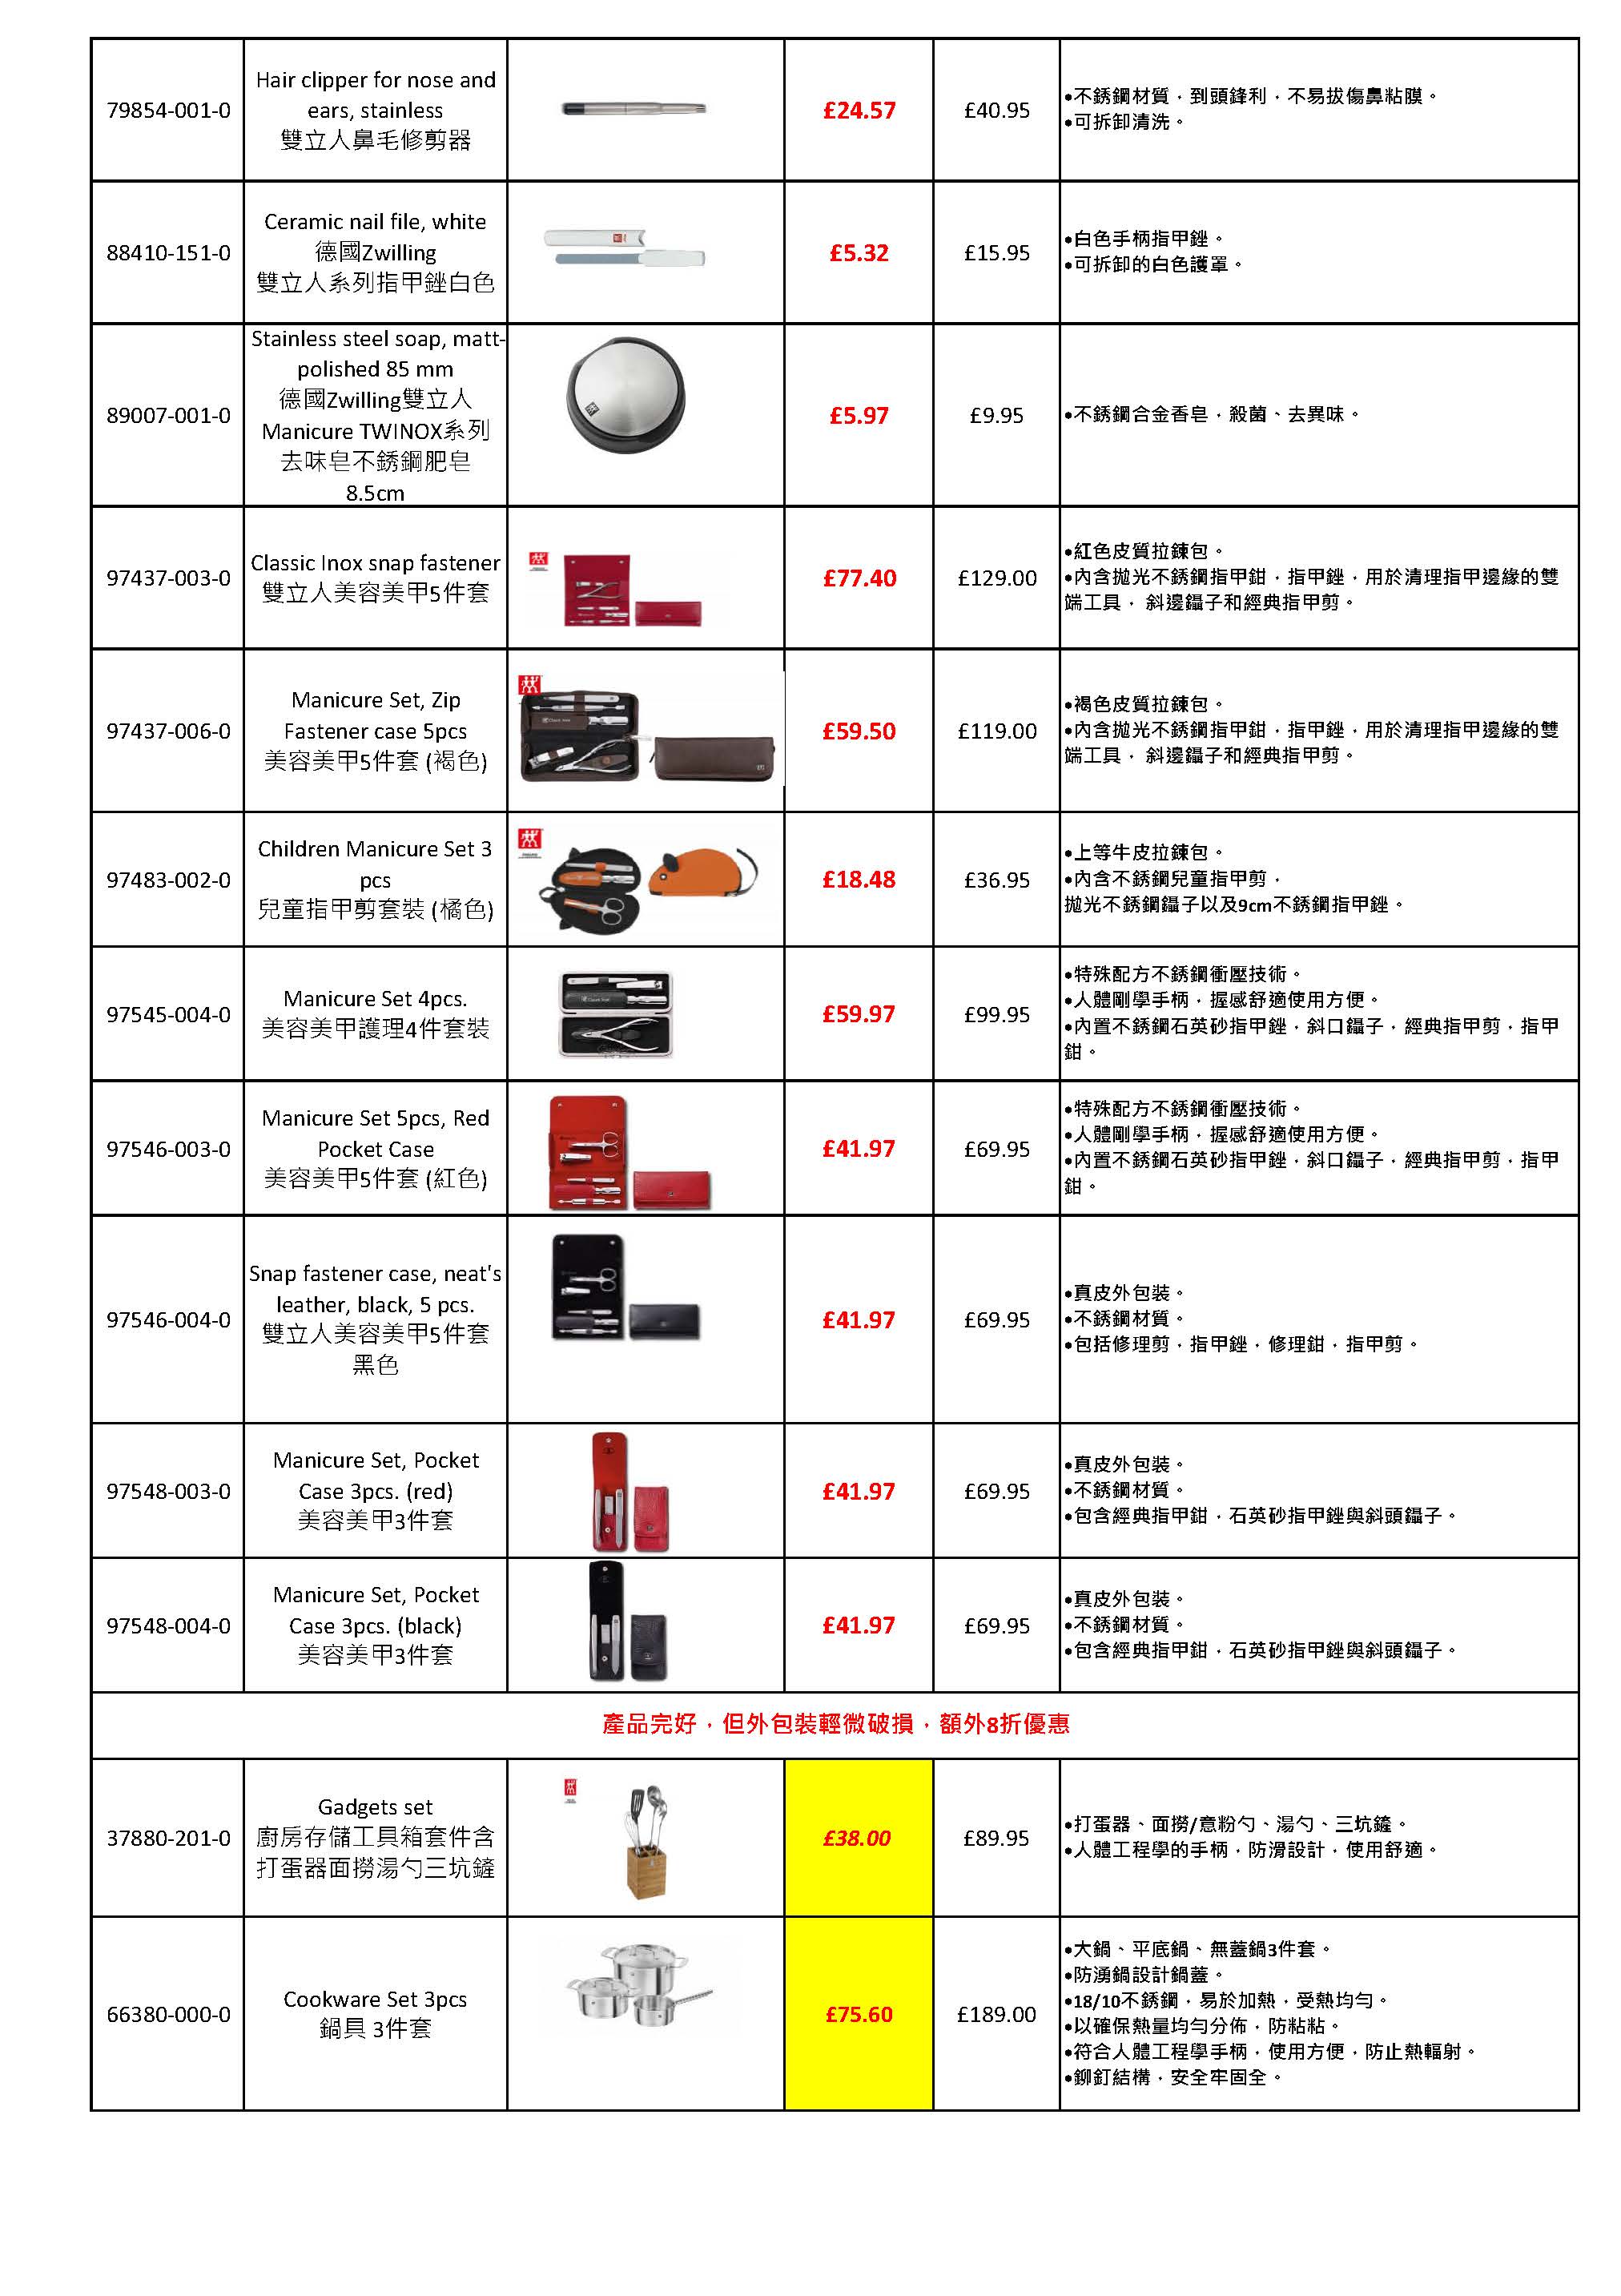 01032017 Britsense Full Sales List Traditional Chinese Version_Page_6.jpg